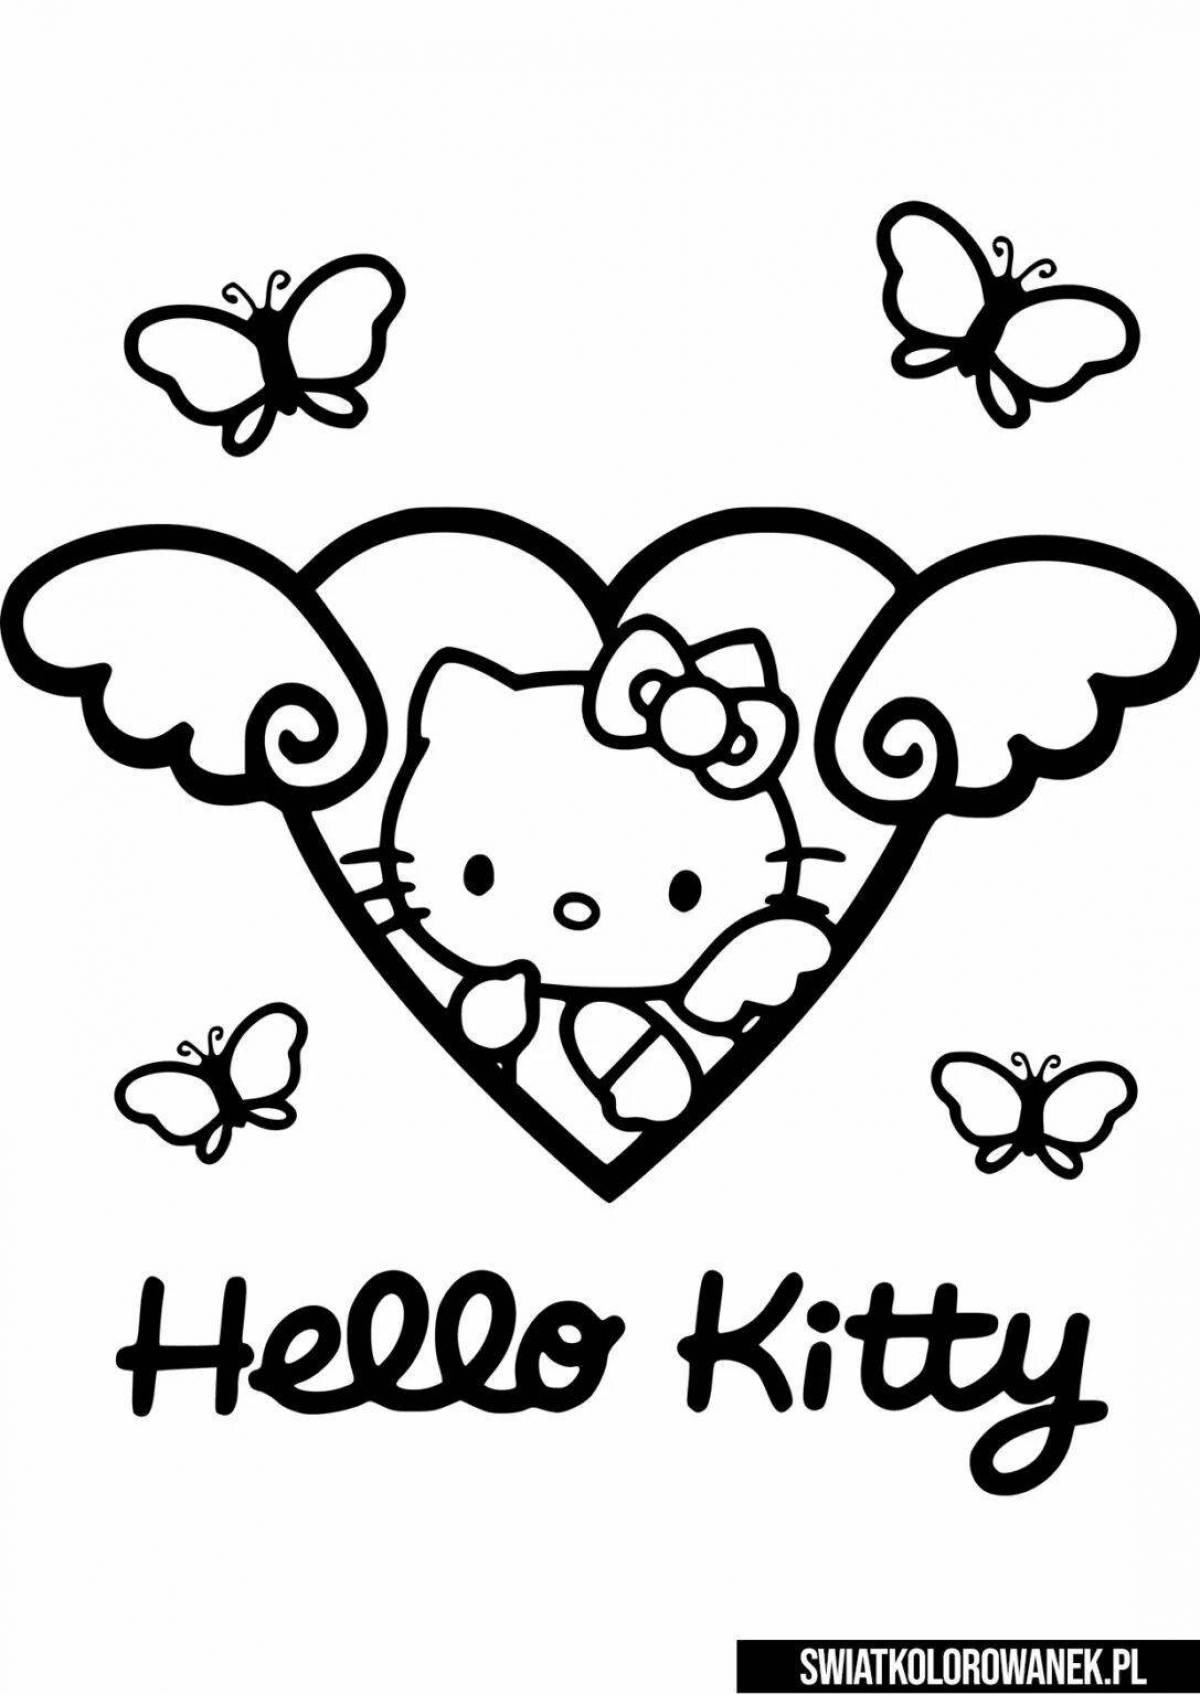 Great hello kitty poster